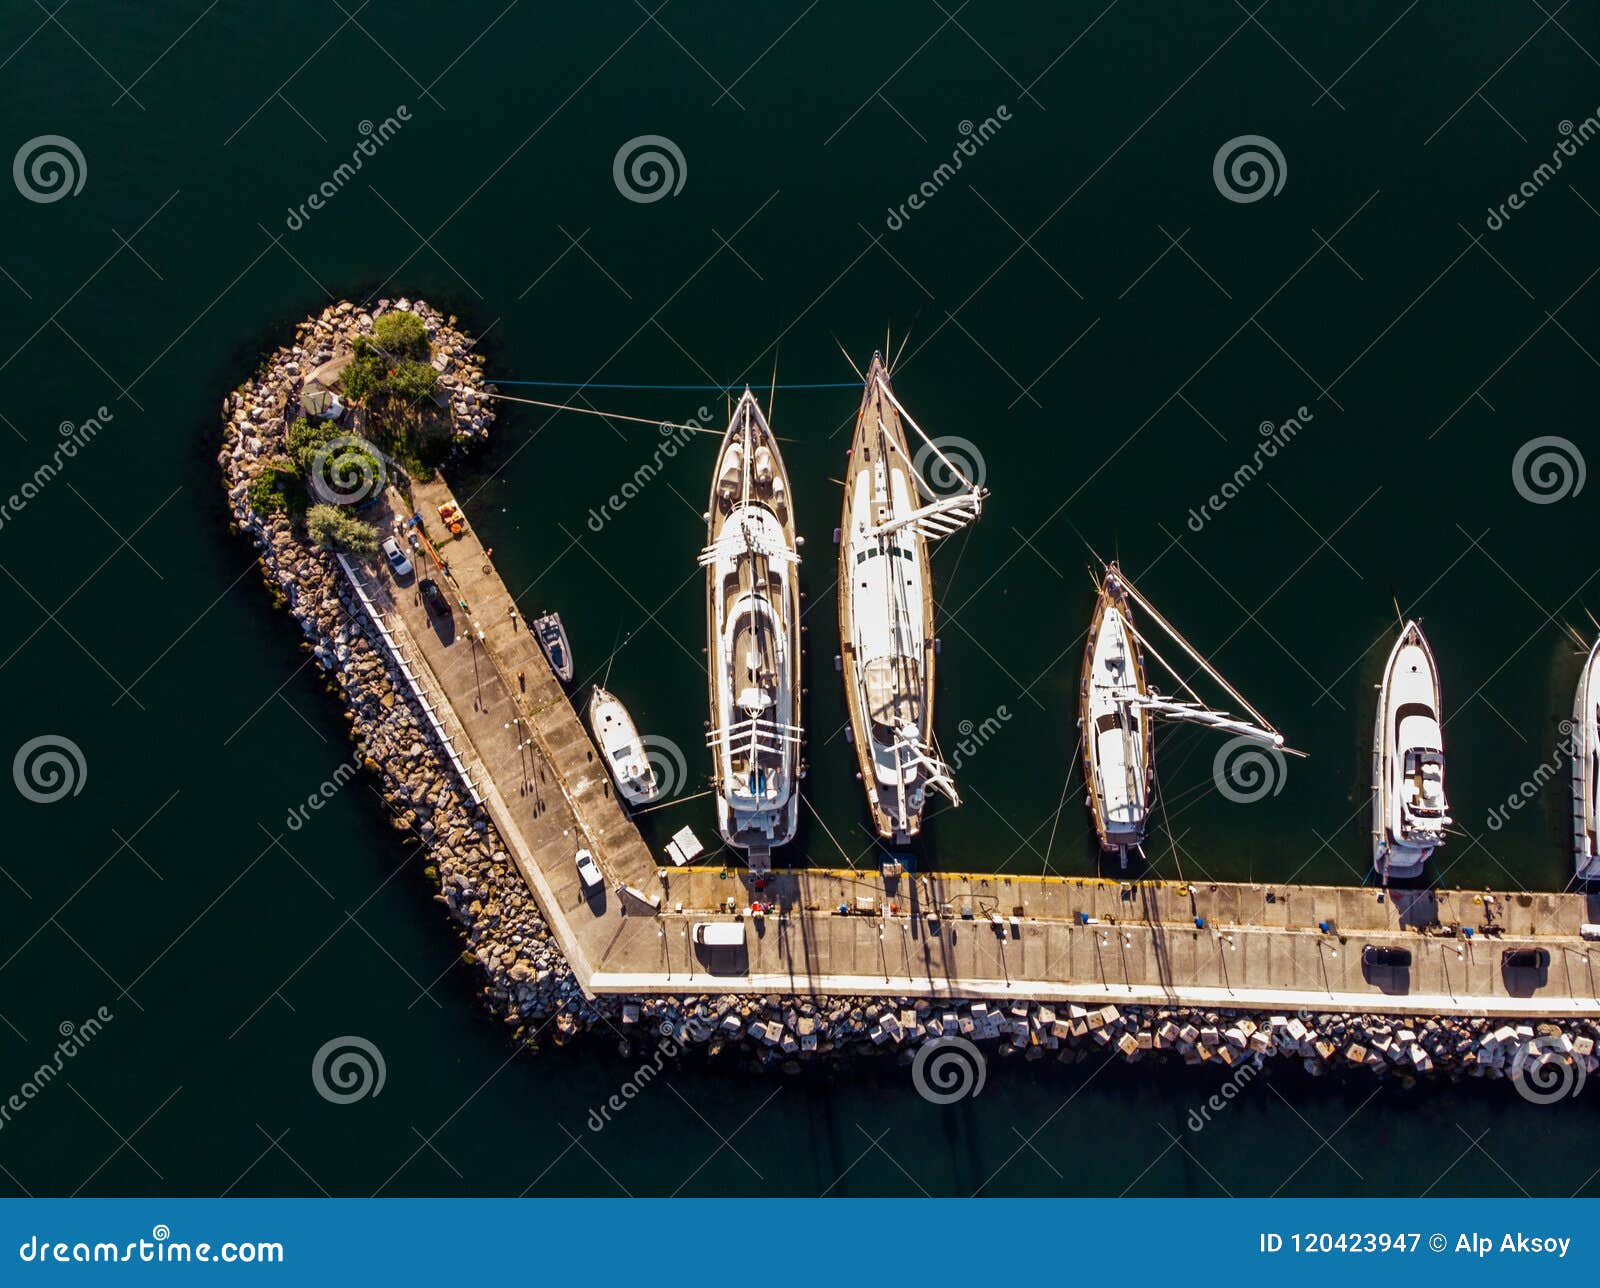 aerial drone view of kalamis fenerbahce marina with boats docked in voula istanbul / birds eye view.